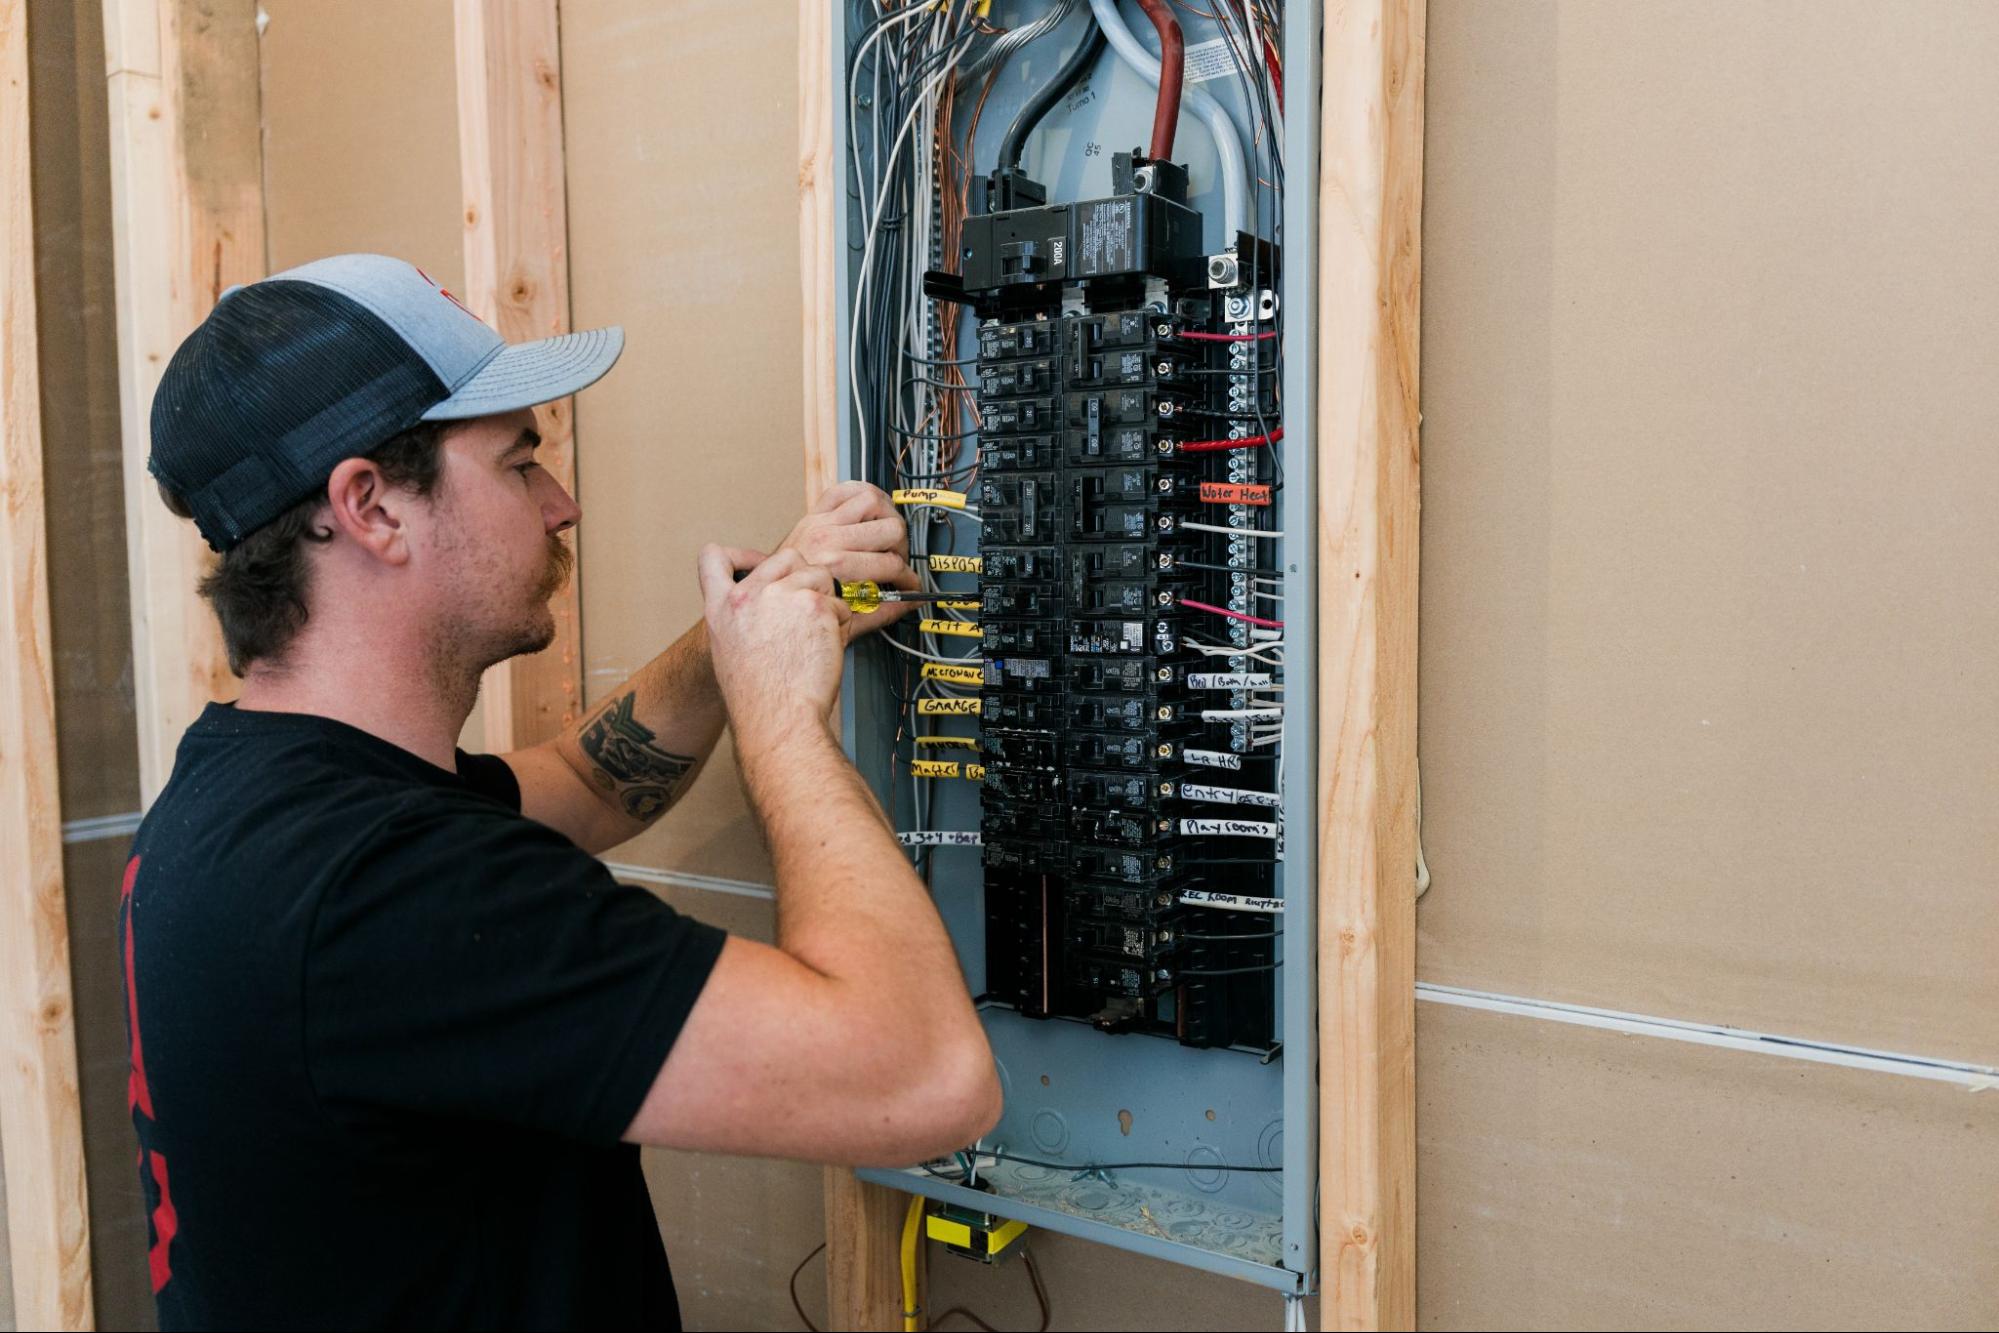 Circuit breaker panels showcase the heart of electrical safety in homes and commercial buildings.